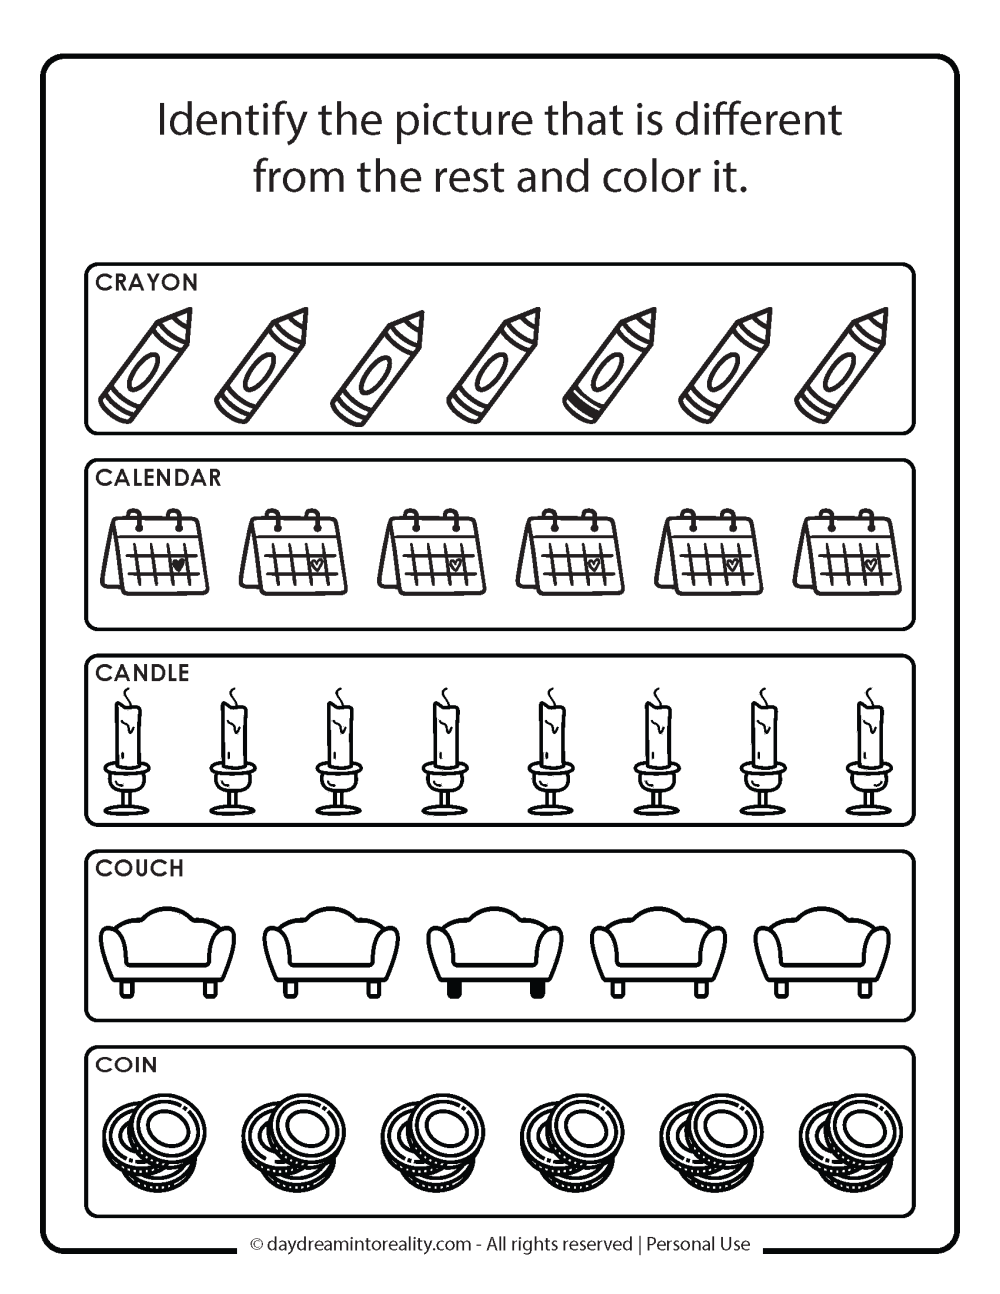 Identify the Different Image - Letter C worksheet free printable